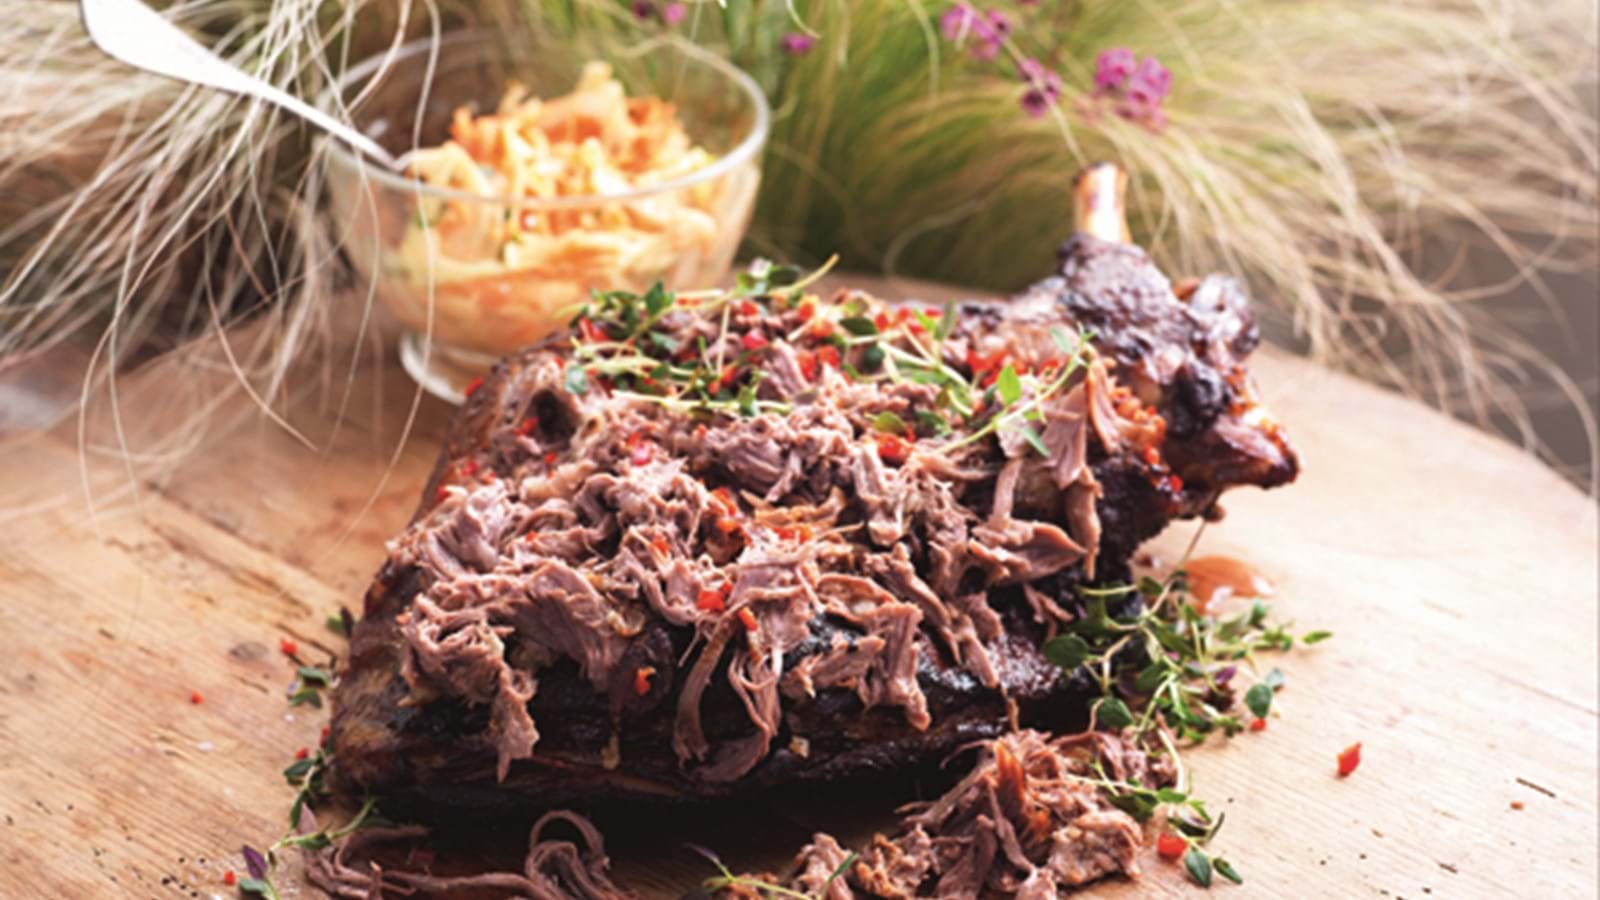 Pulled Shoulder of Lamb with Fennel, Carrot Slaw | Recipe | Simply Beef Lamb